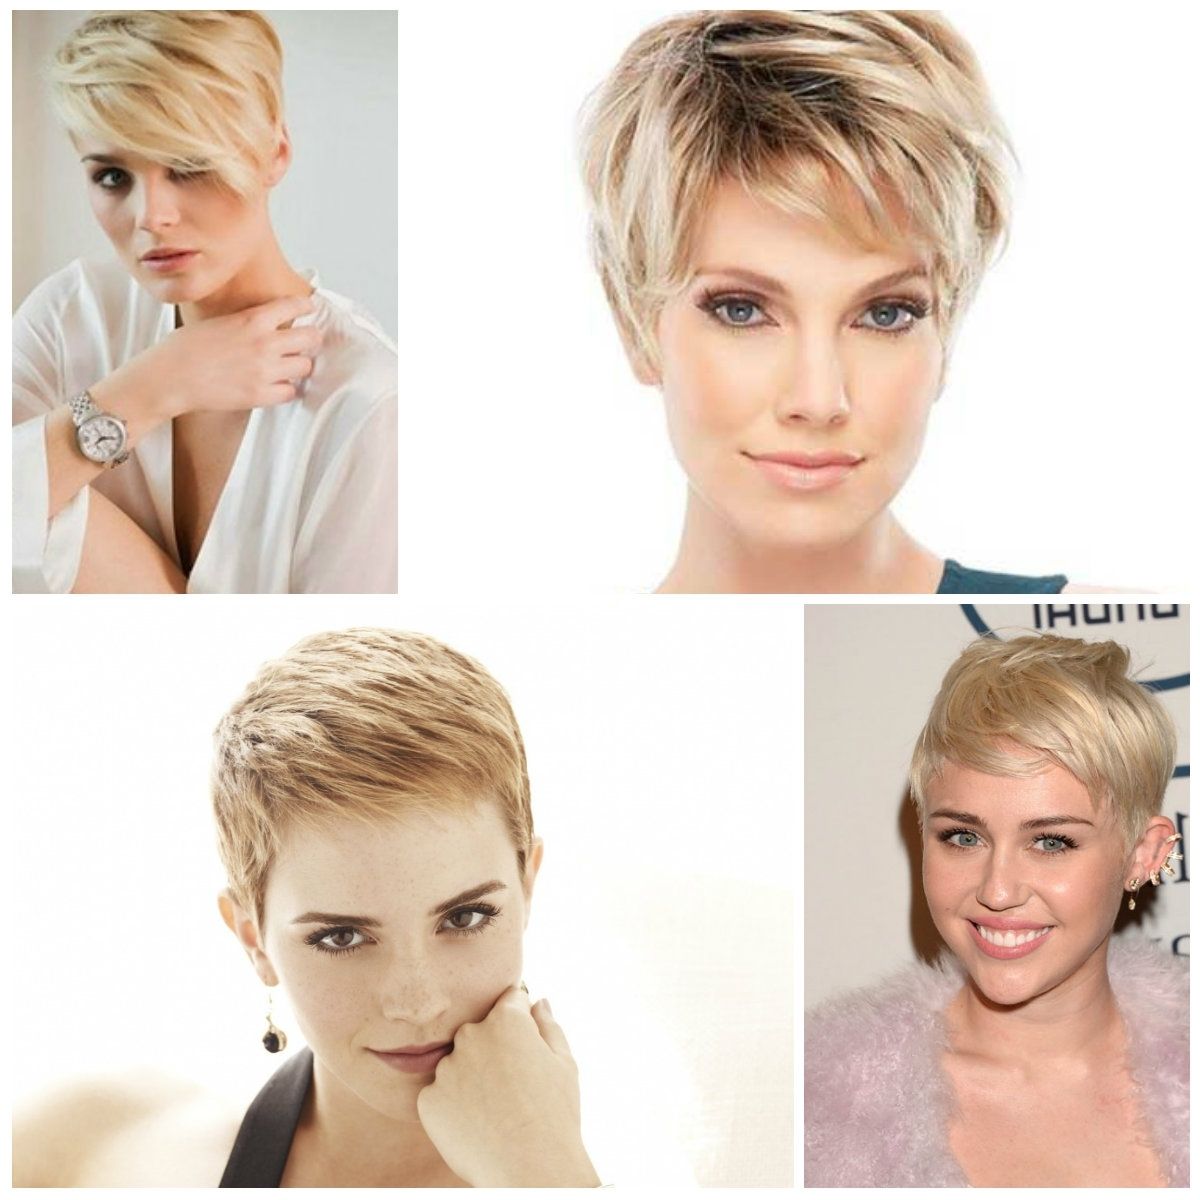 Subtle Blonde Pixie Hairstyles – Haircuts And Hairstyles For 2017 Inside Most Recent Short Straight Pixie Hairstyles (View 10 of 15)